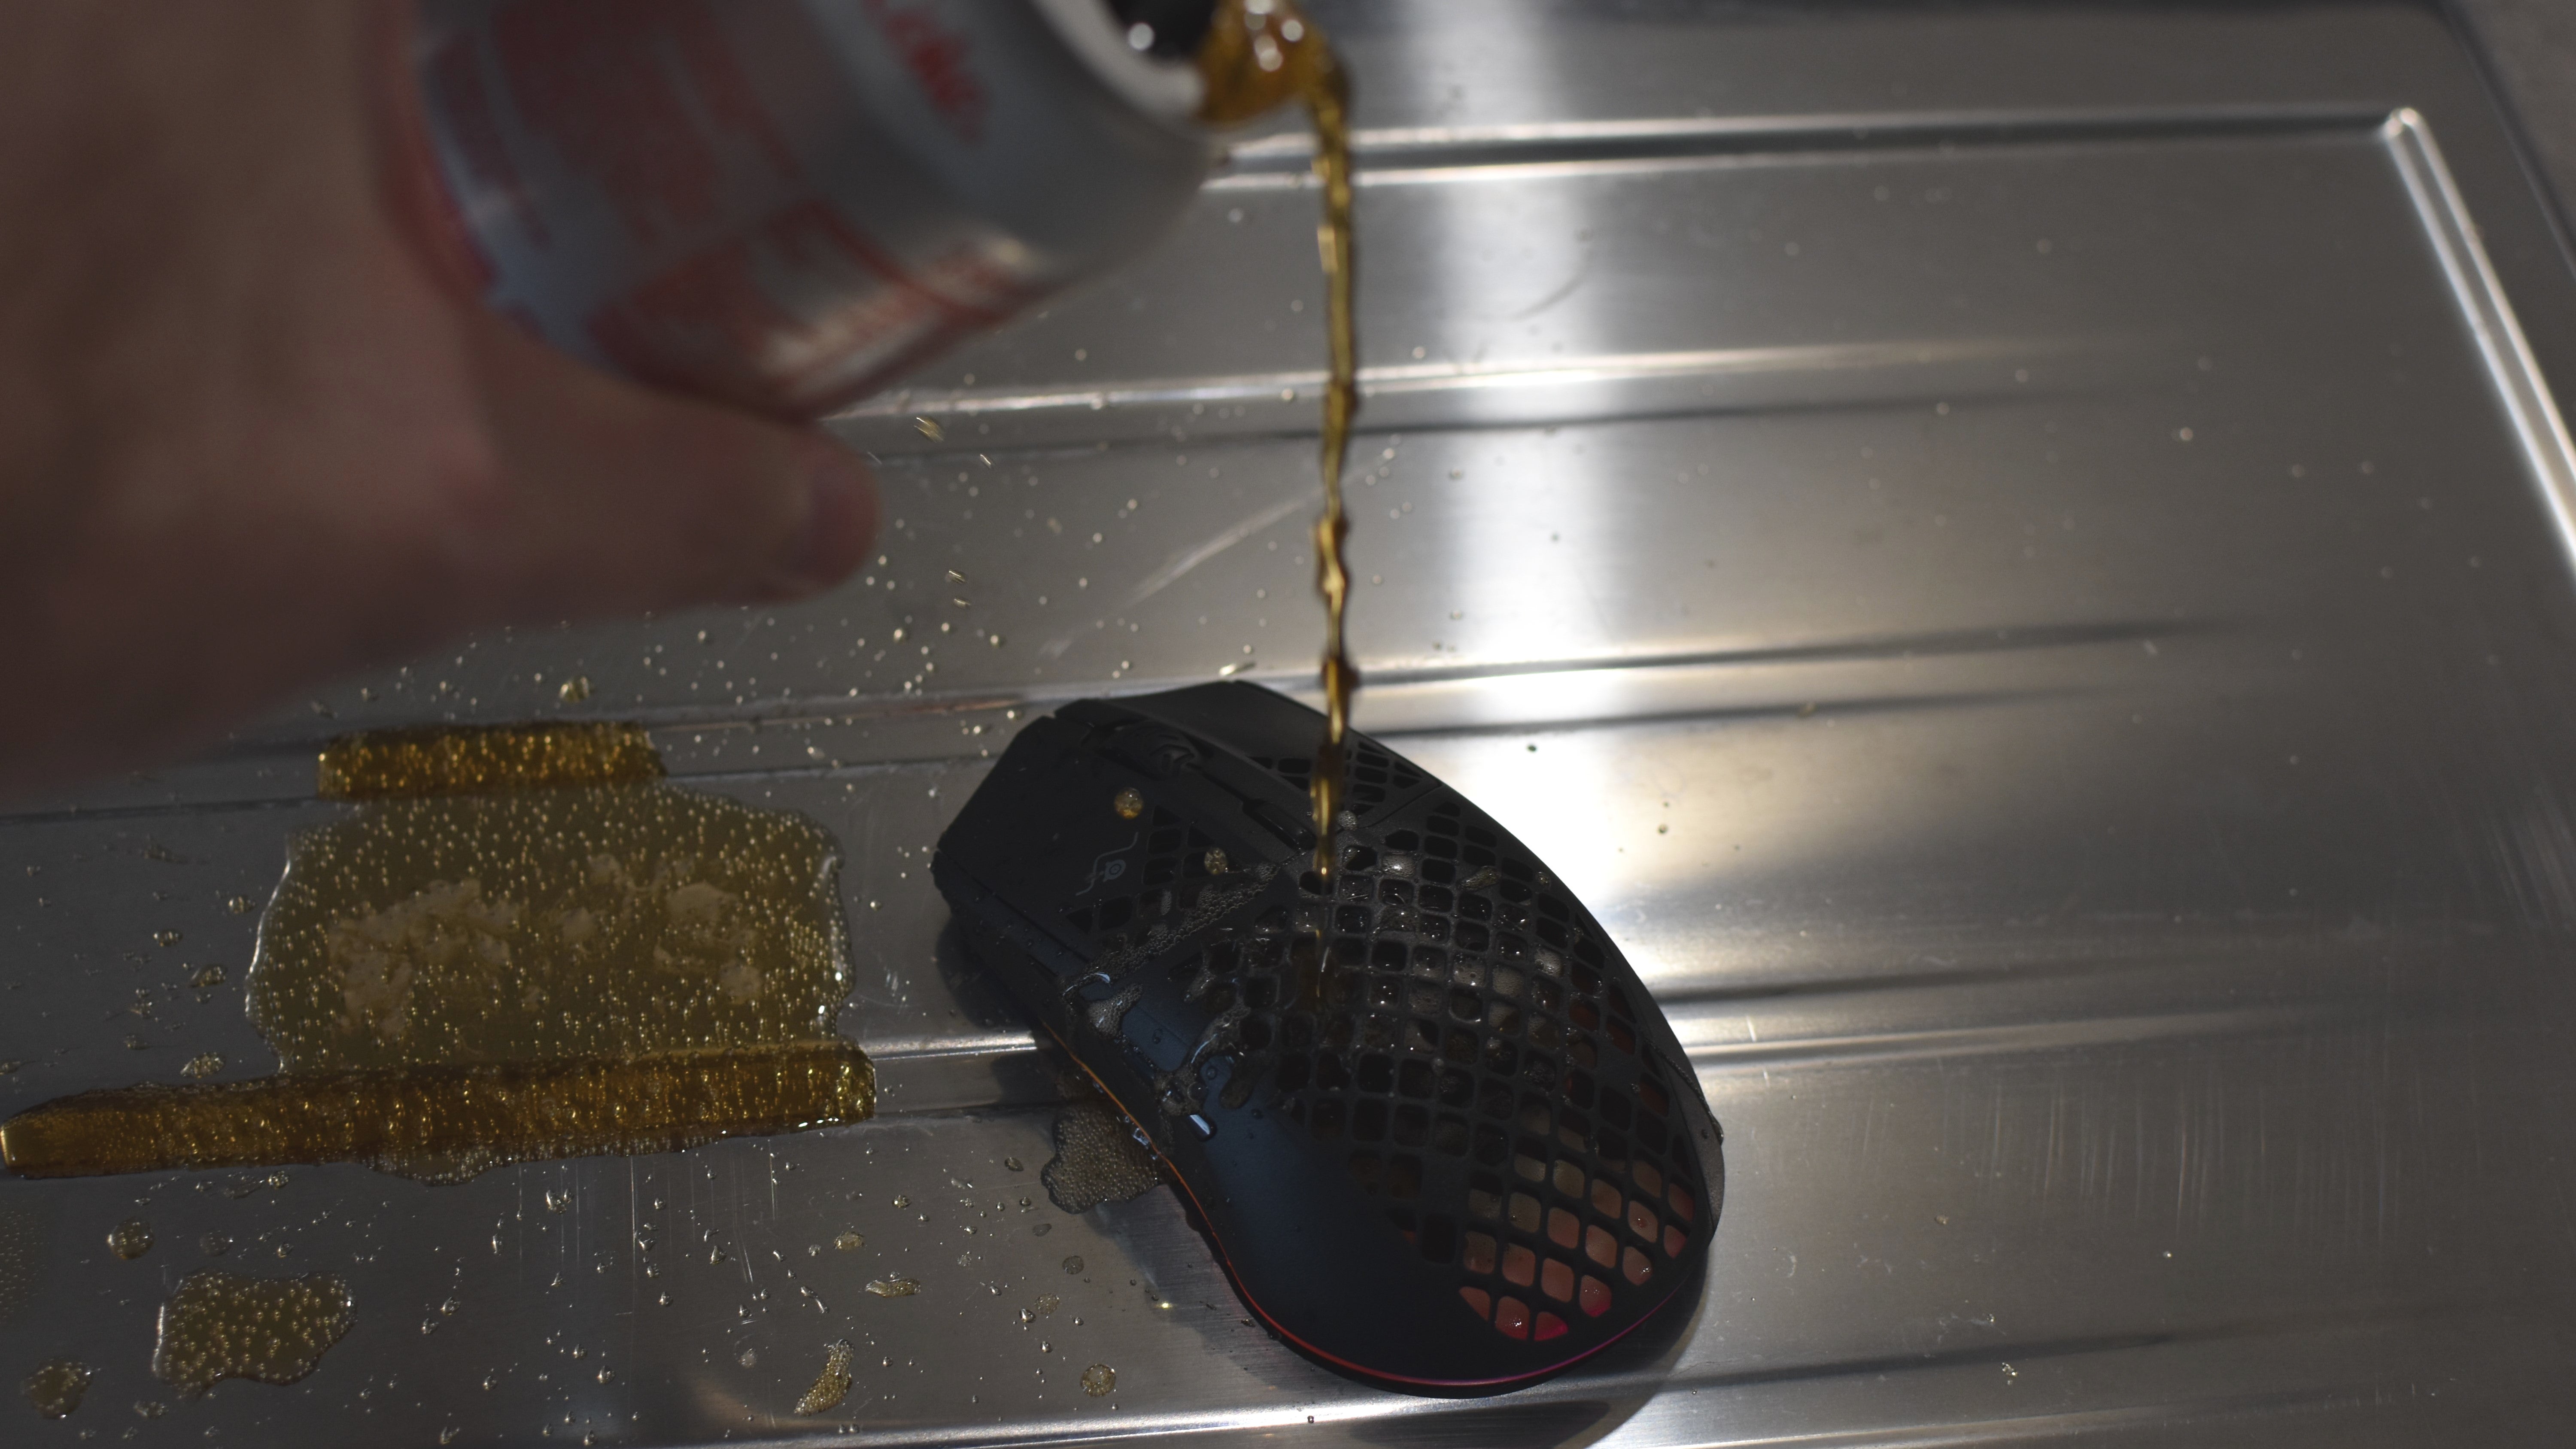 A can of Diet Coke being poured onto the SteelSeries Aerox 3 Wireless mouse, to simulate a spillage.